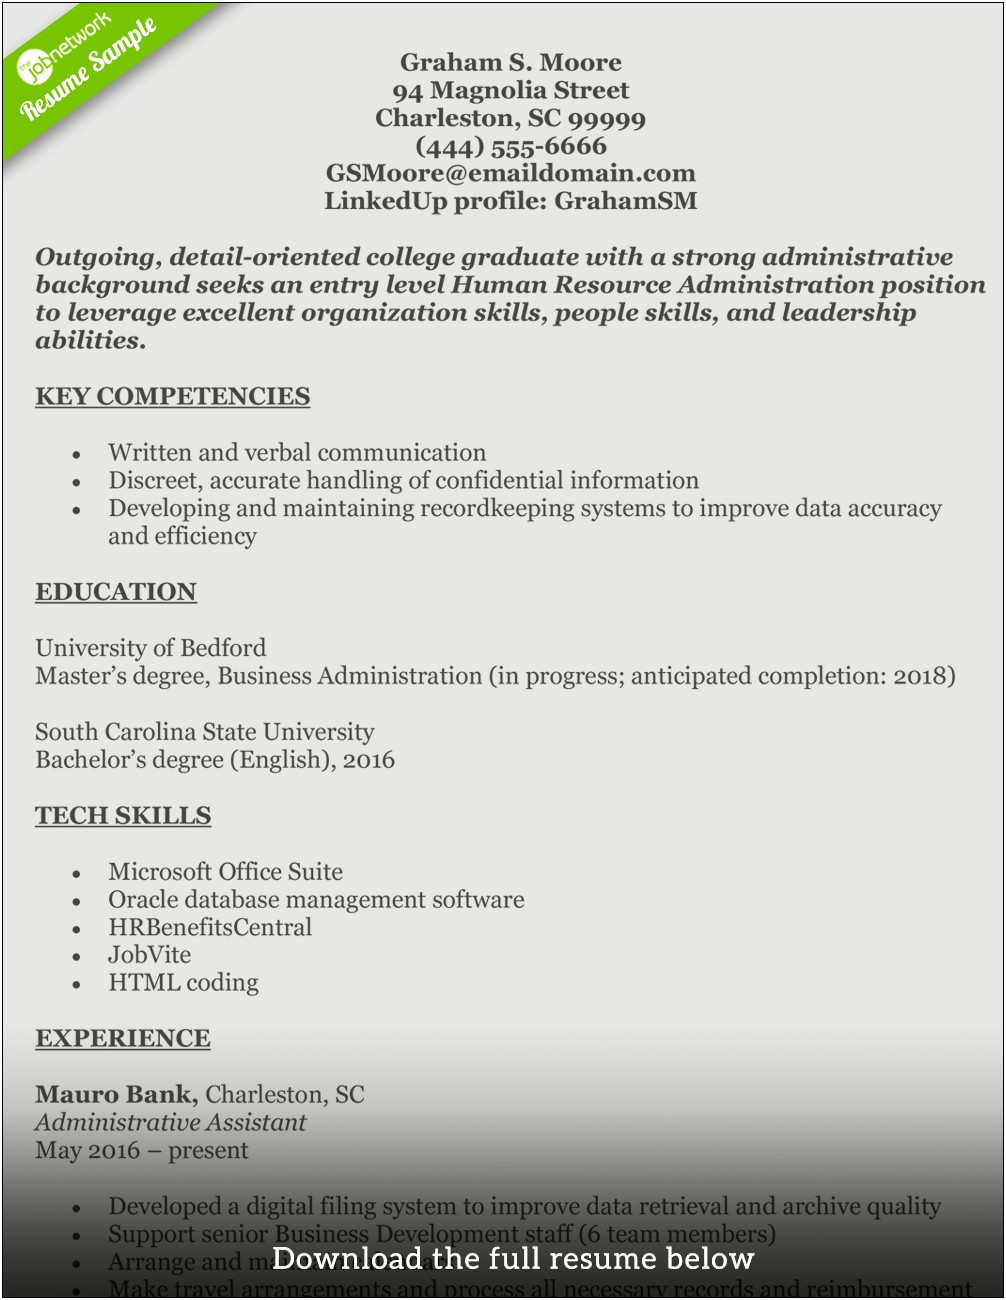 Resume Examples For Entry Level Banking